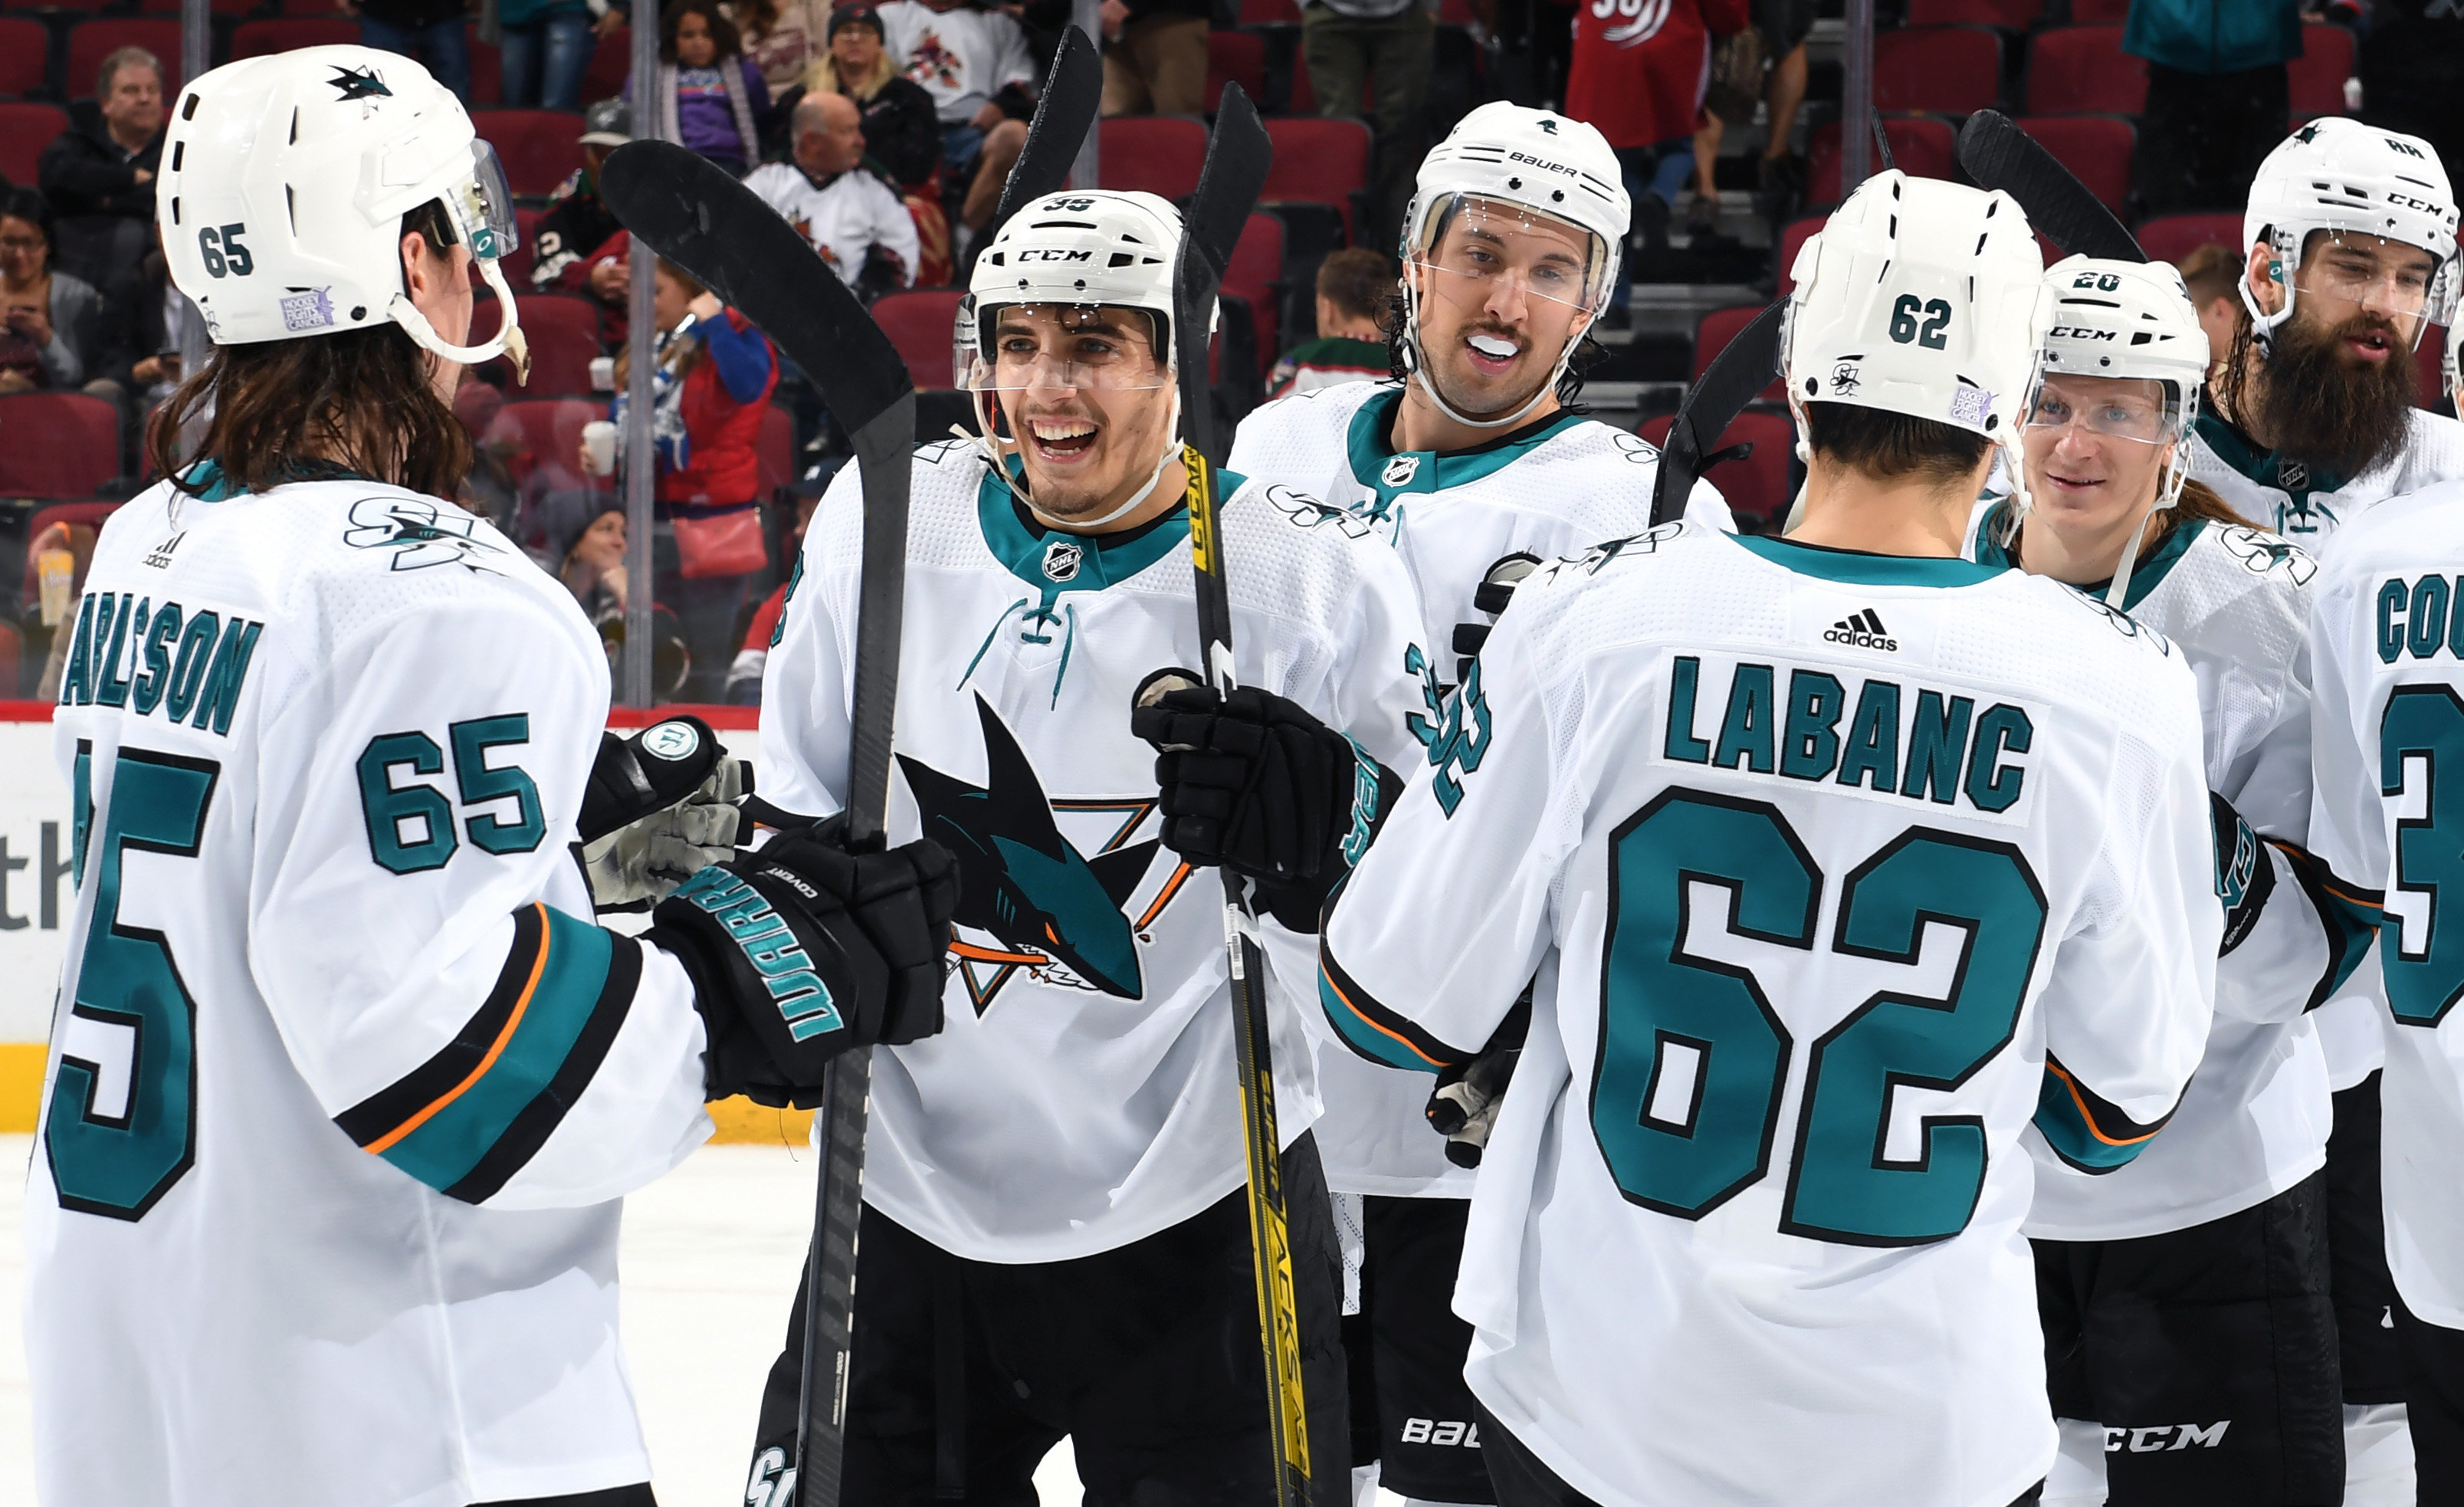 Mario Ferraro #38 of the San Jose Sharks is congratulated by Erik Karlsson #65, Kevin LaBanc #62 and teammates following a 4-2 victory against the Arizona Coyotes during the NHL game at Gila River Arena on November 30, 2019 in Glendale, Arizona.